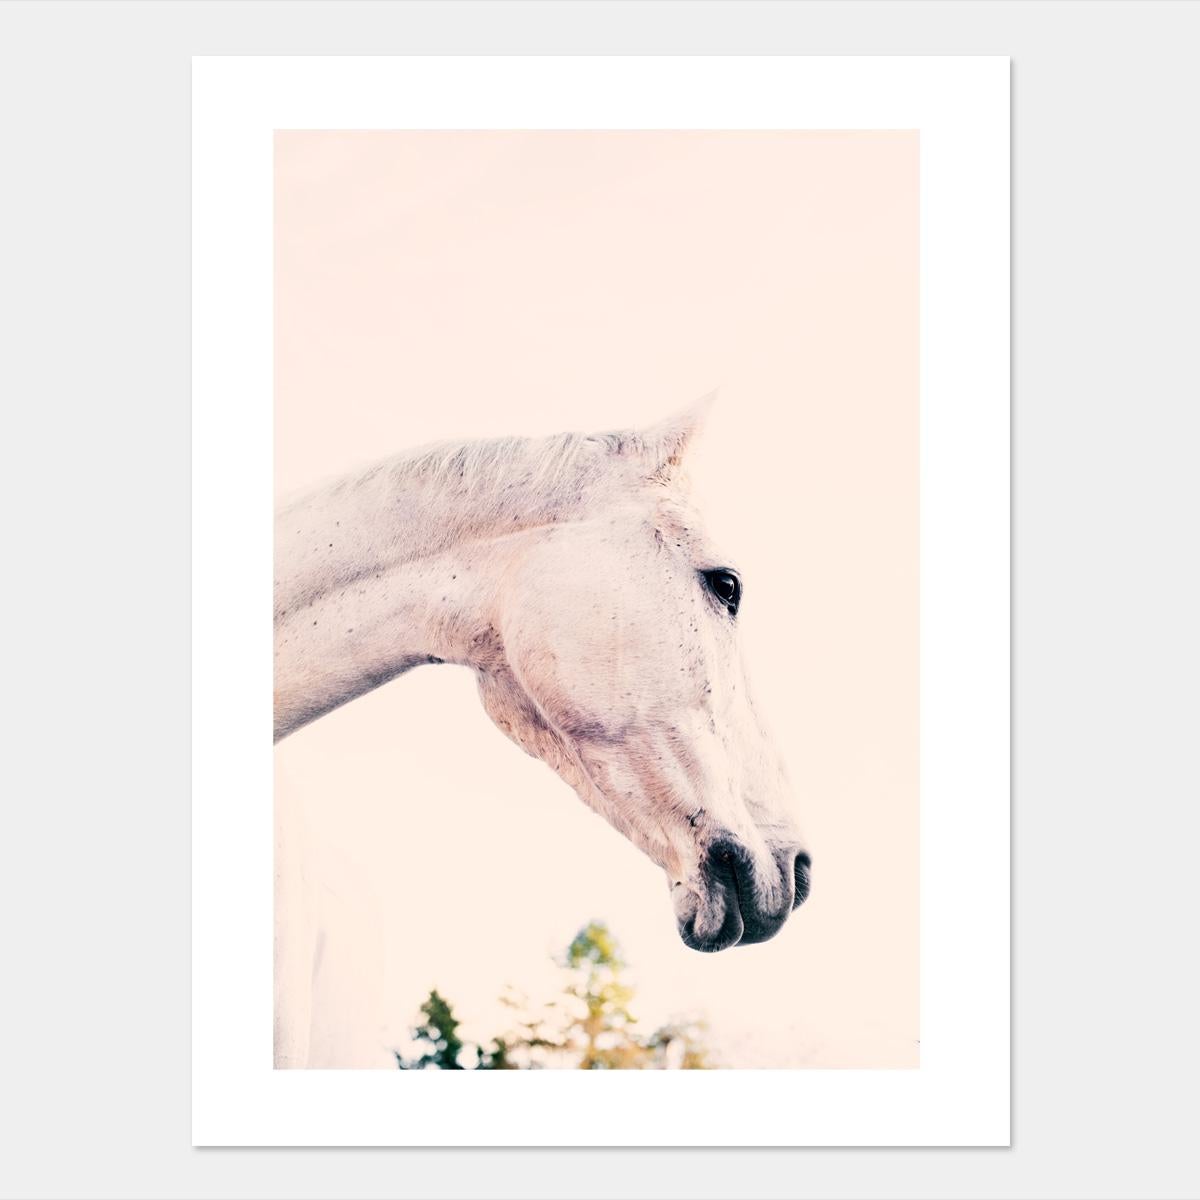 Iggy 

Giclee Fine Art Print. Framing/mounting to be arranged.
1/25 

From Horses and Humans Collection By Vanessa Taylor.

Also available in different sizes.